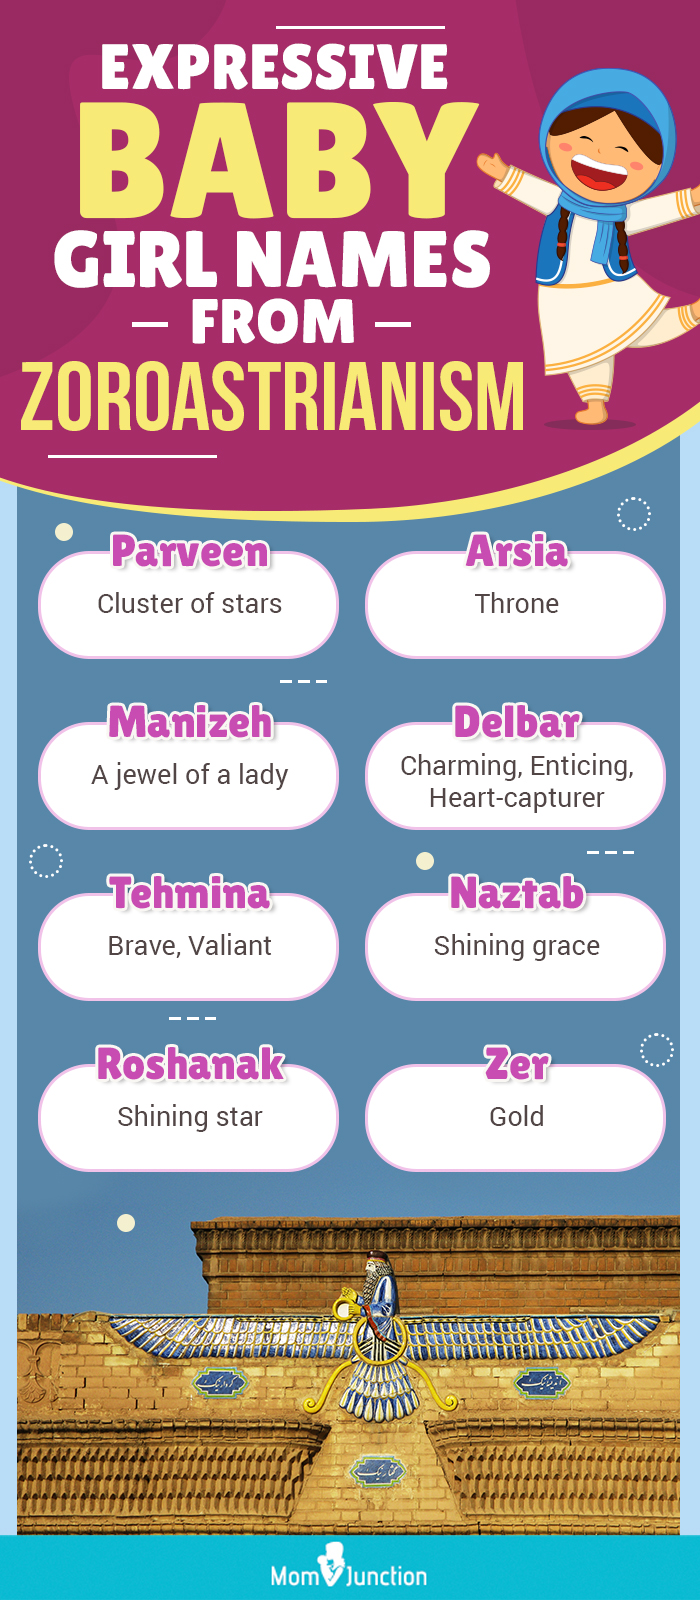 expressive baby girl names from zoroastrianism (infographic)